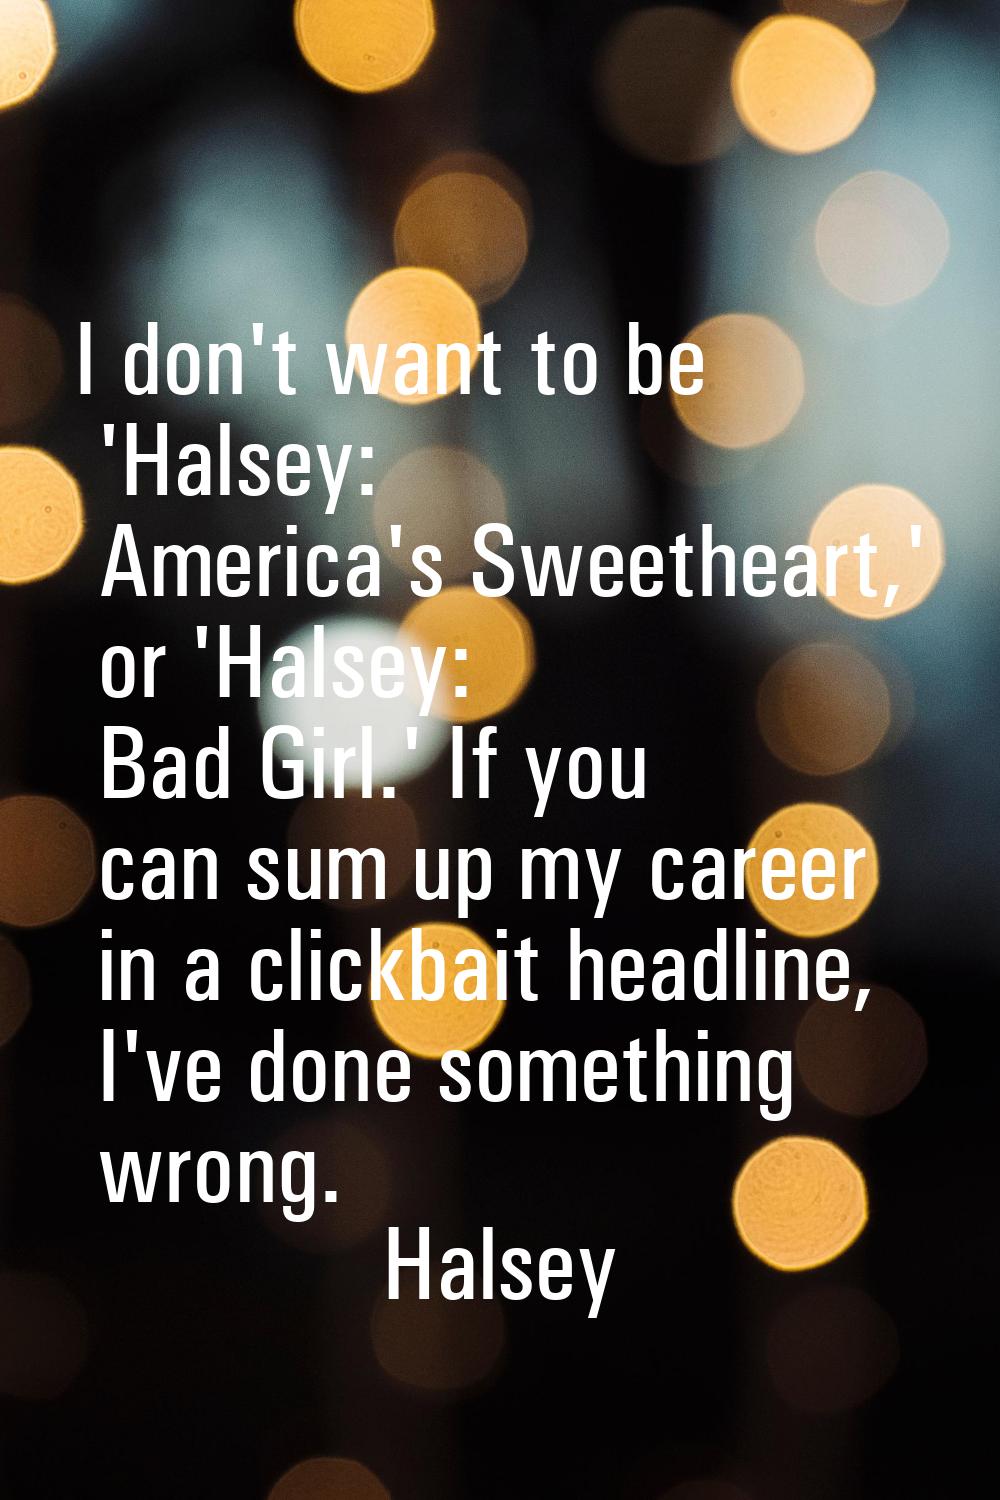 I don't want to be 'Halsey: America's Sweetheart,' or 'Halsey: Bad Girl.' If you can sum up my care